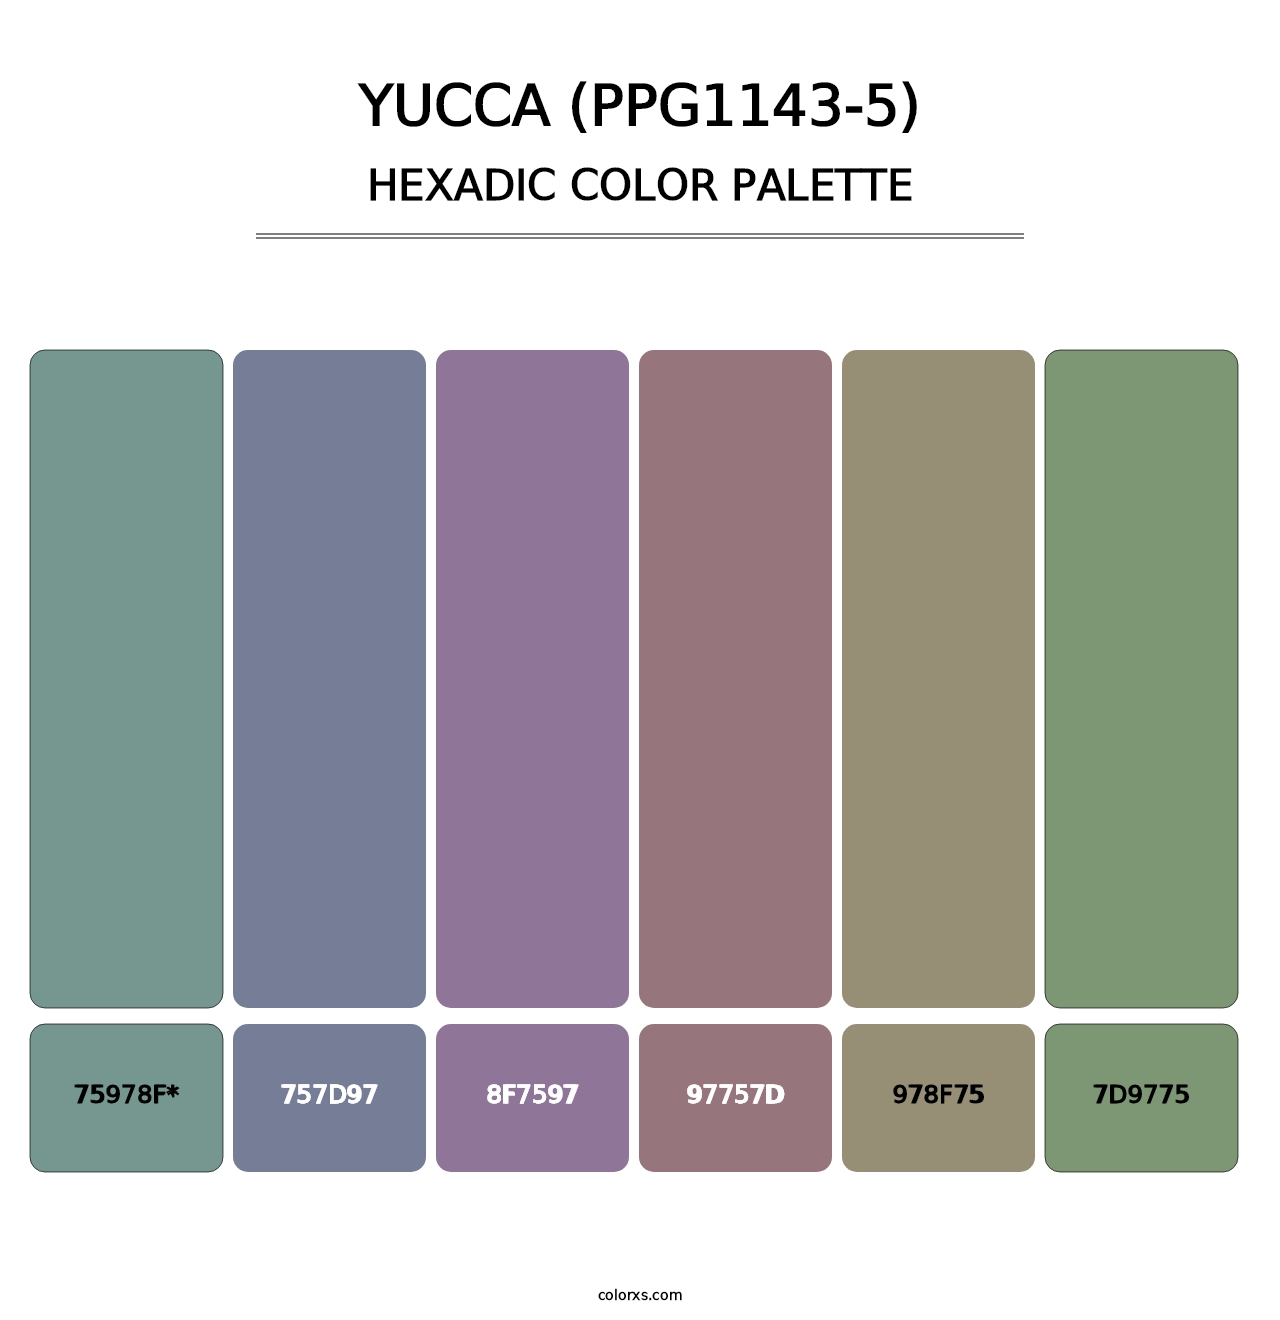 Yucca (PPG1143-5) - Hexadic Color Palette